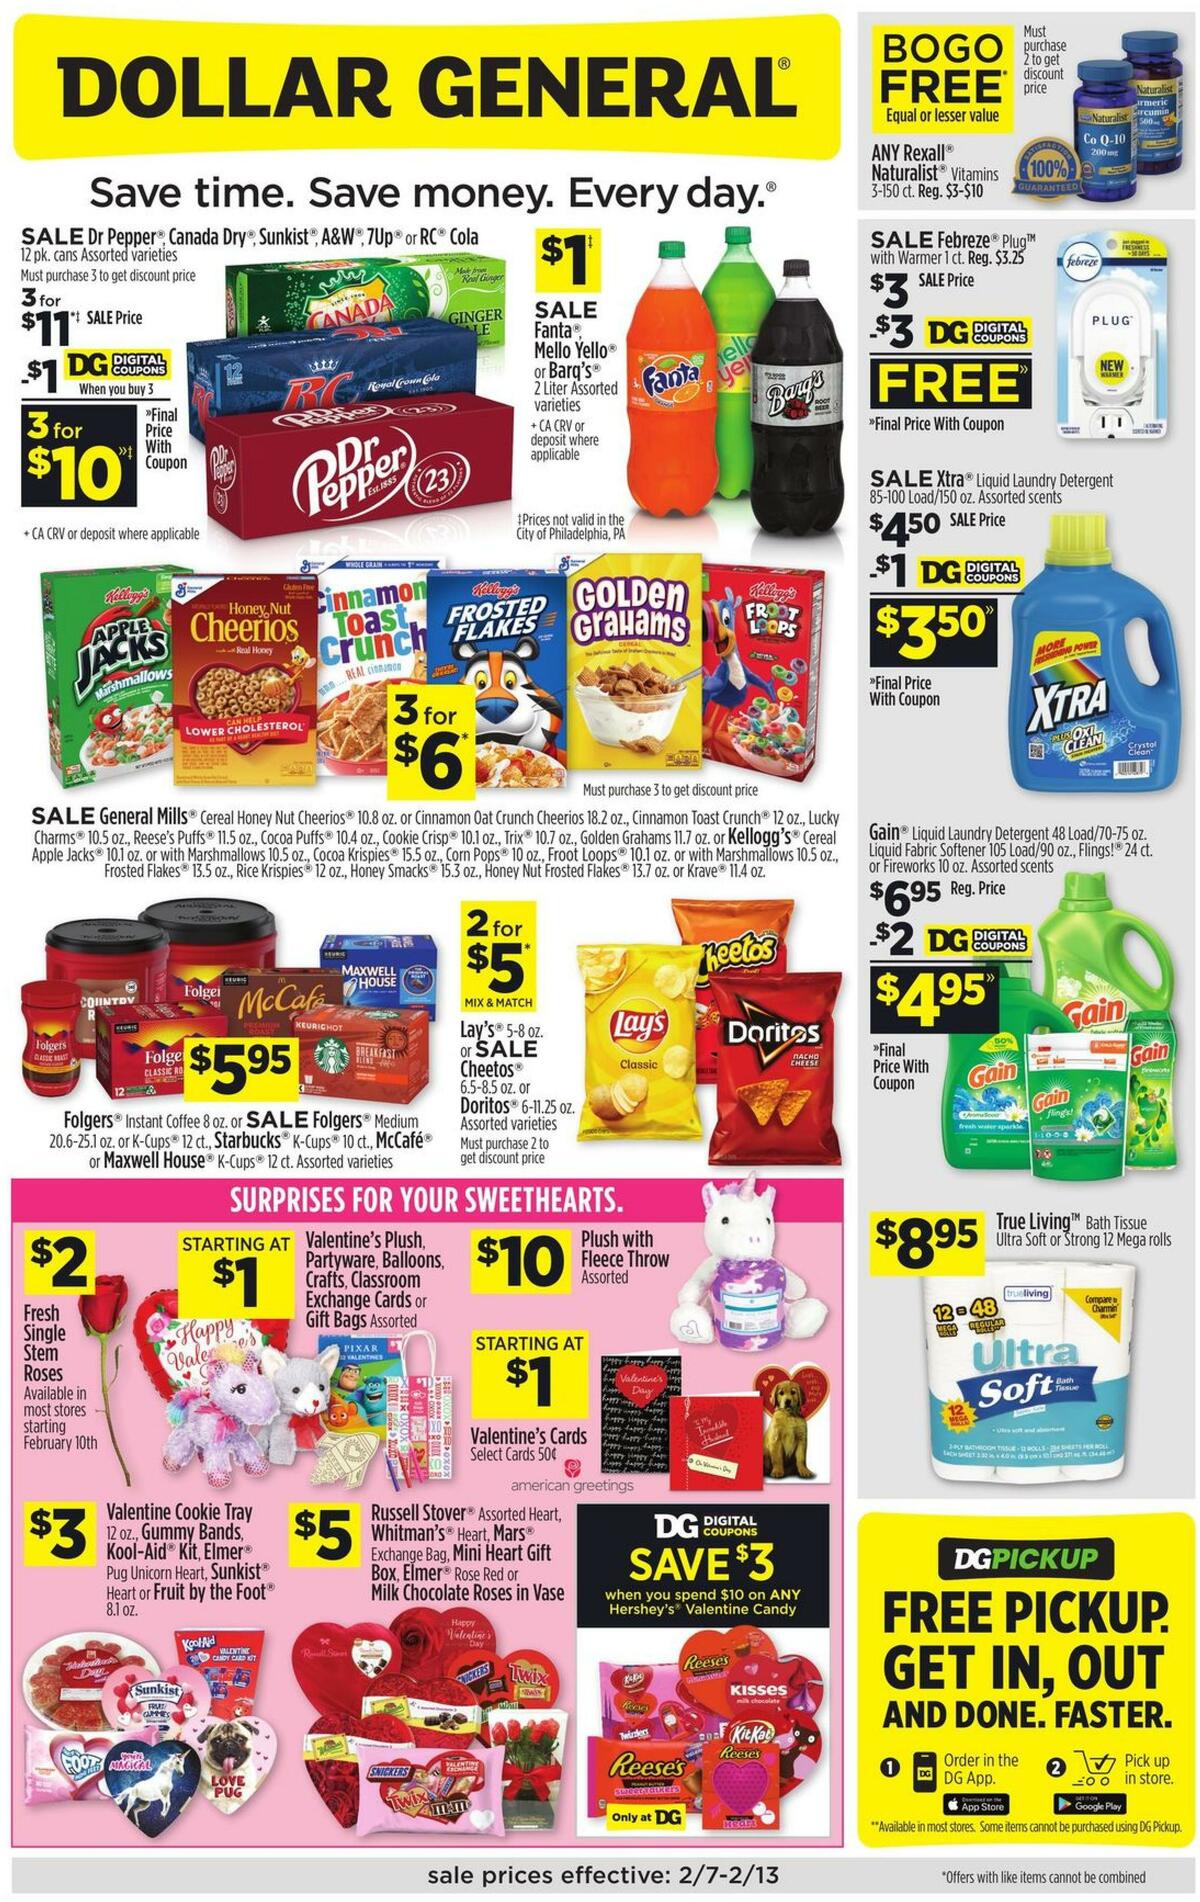 Dollar General Weekly Ad from February 7